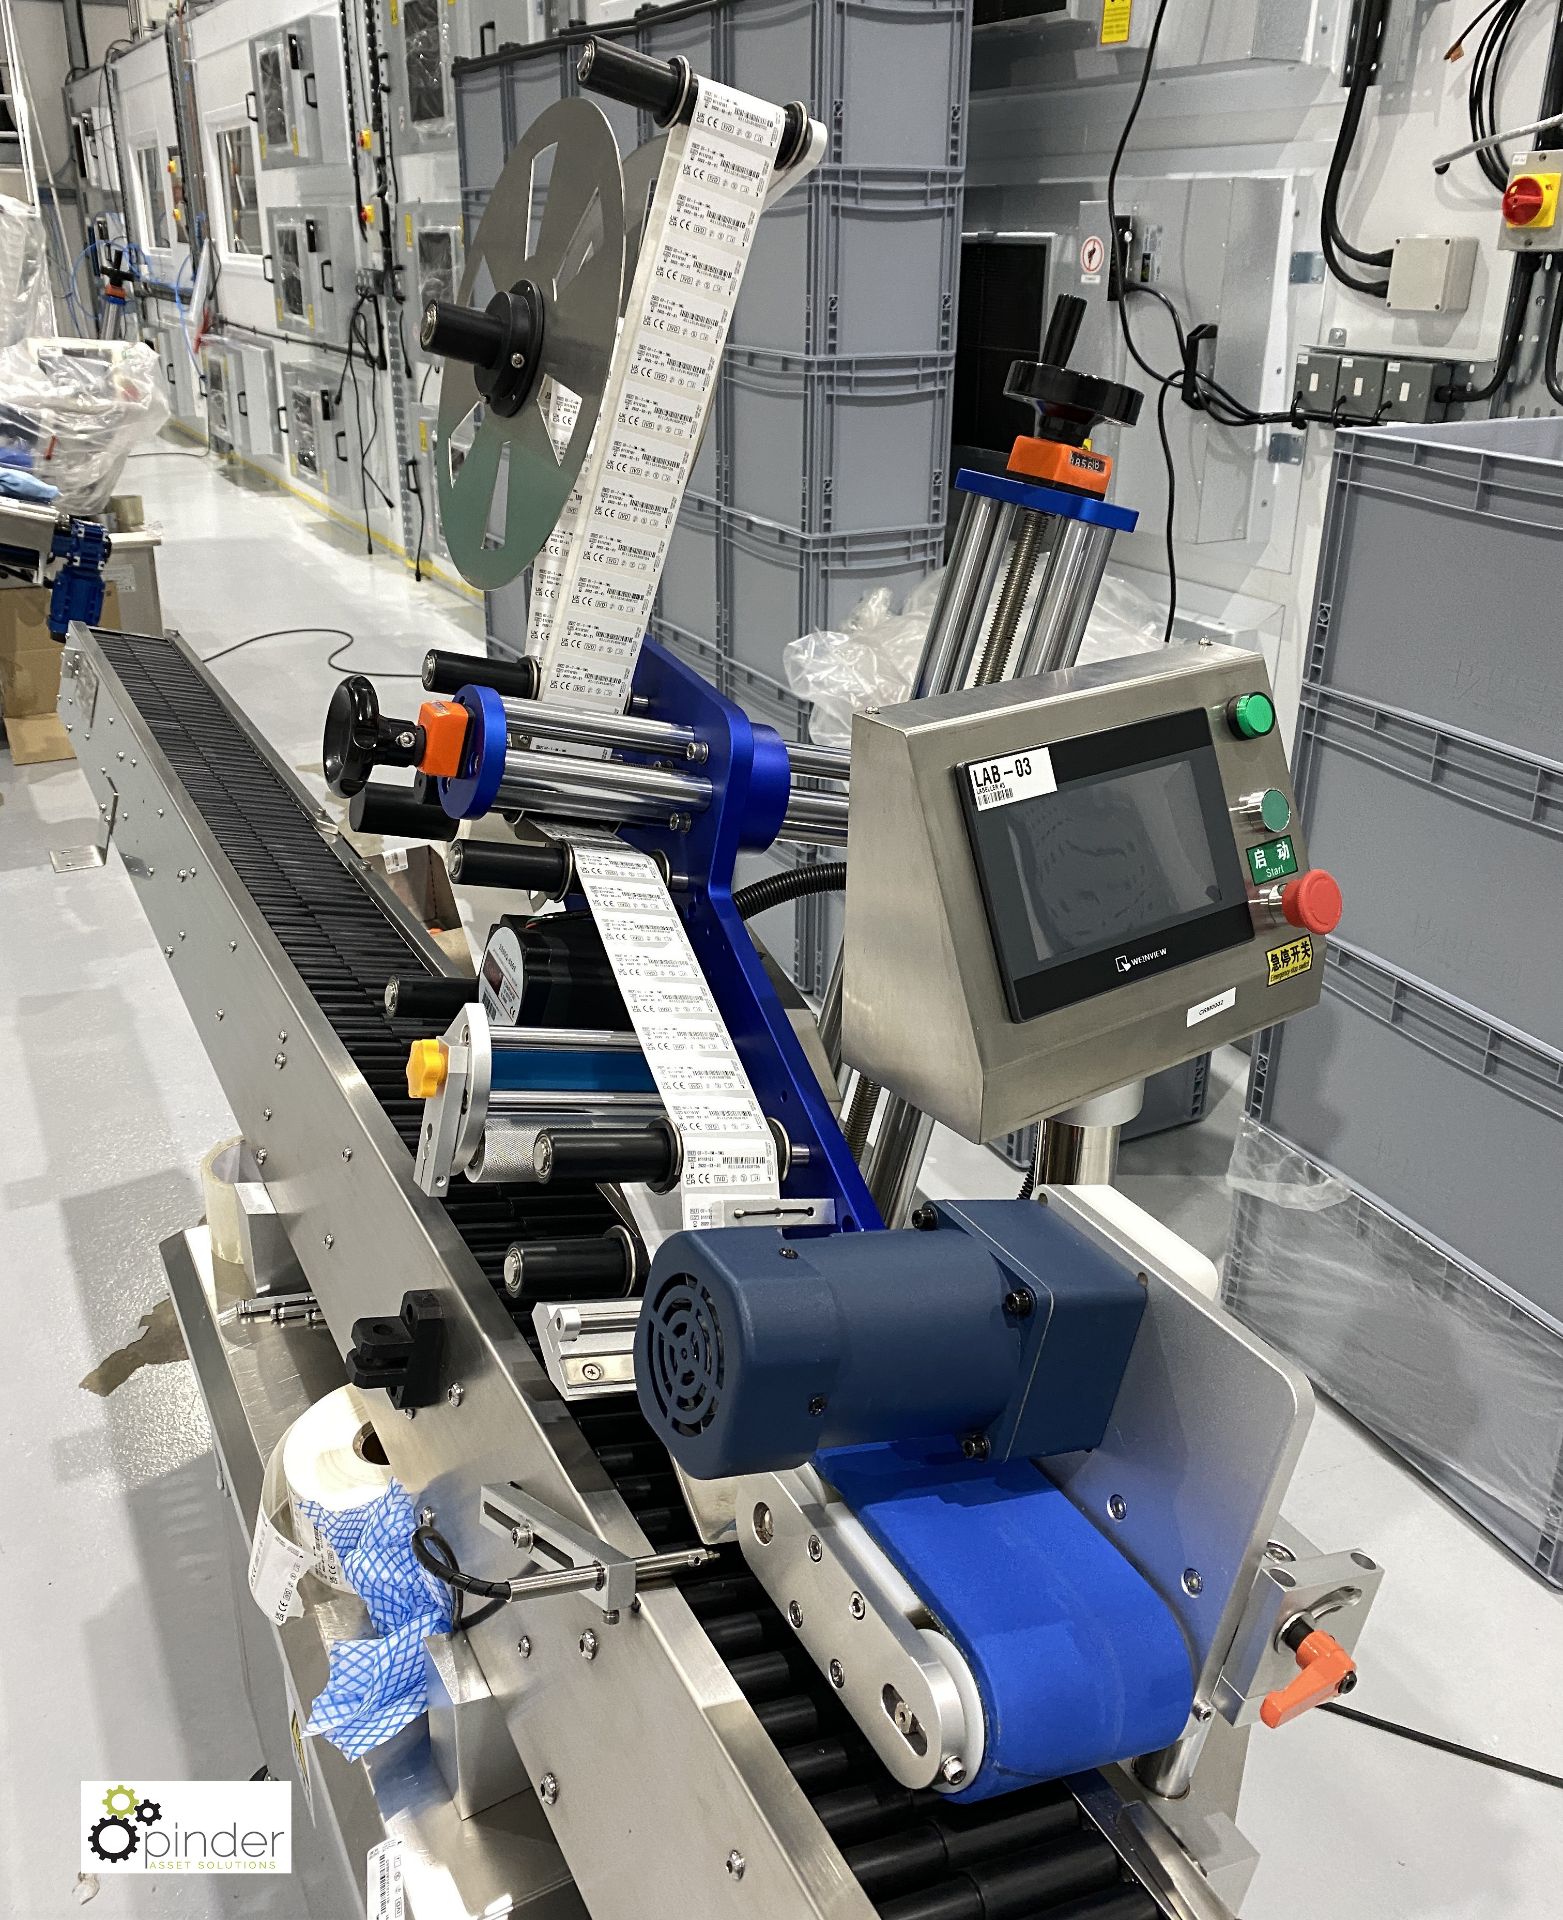 Brightwin Packaging Machinery Co Ltd BWL stainless steel Labeller for use applying labels to - Image 11 of 13